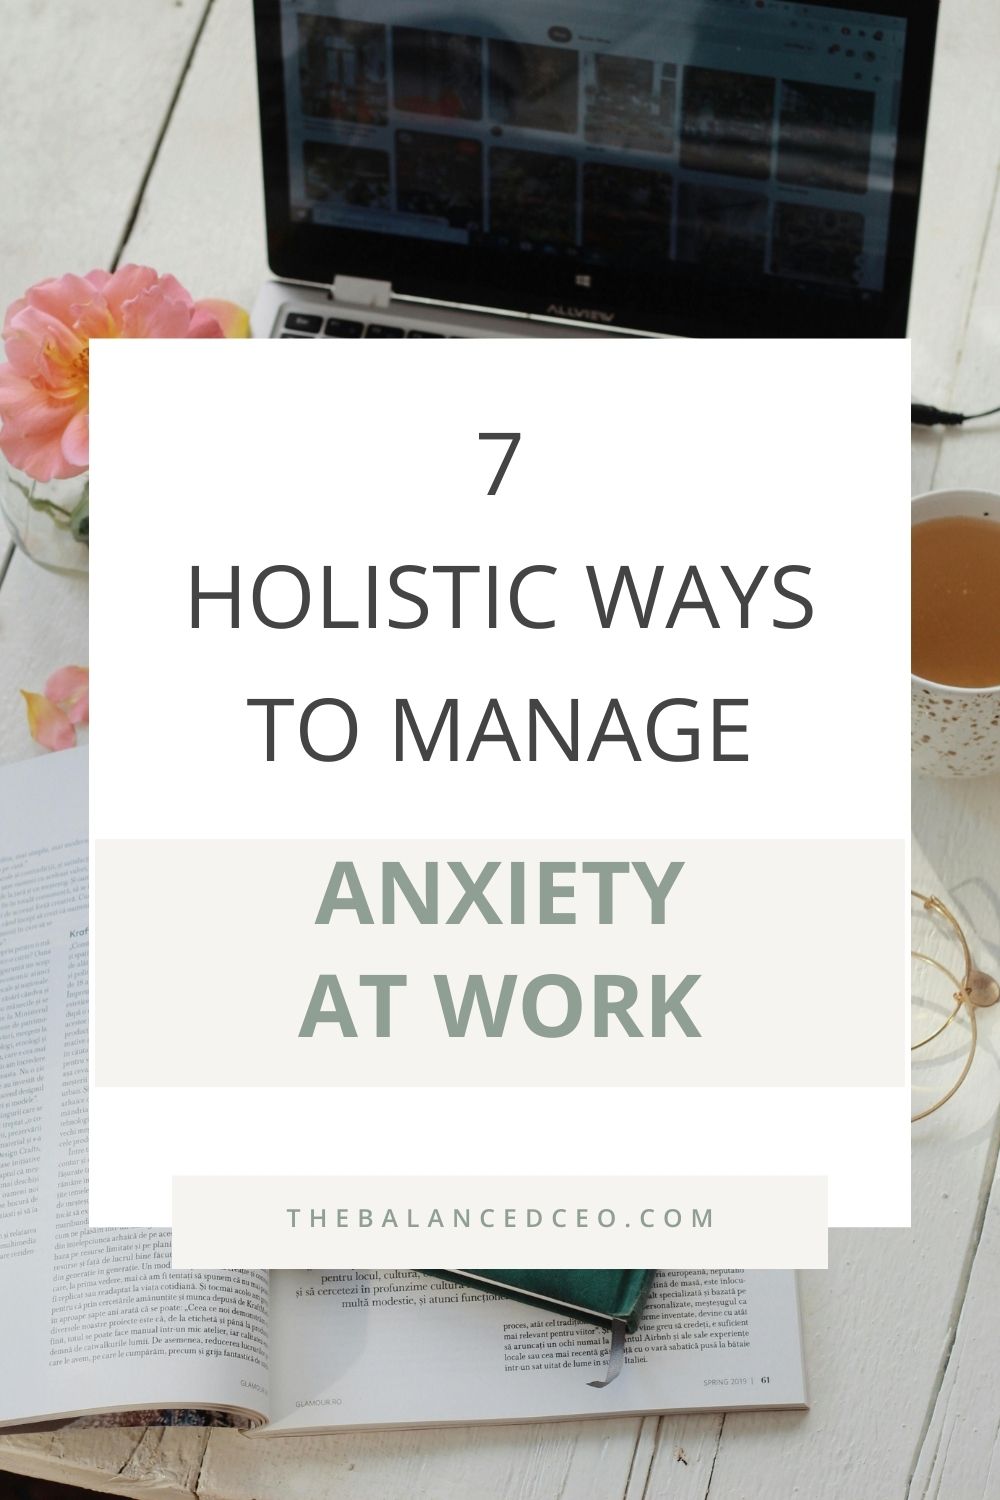 8 Holistic Ways to Manage Anxiety at Work